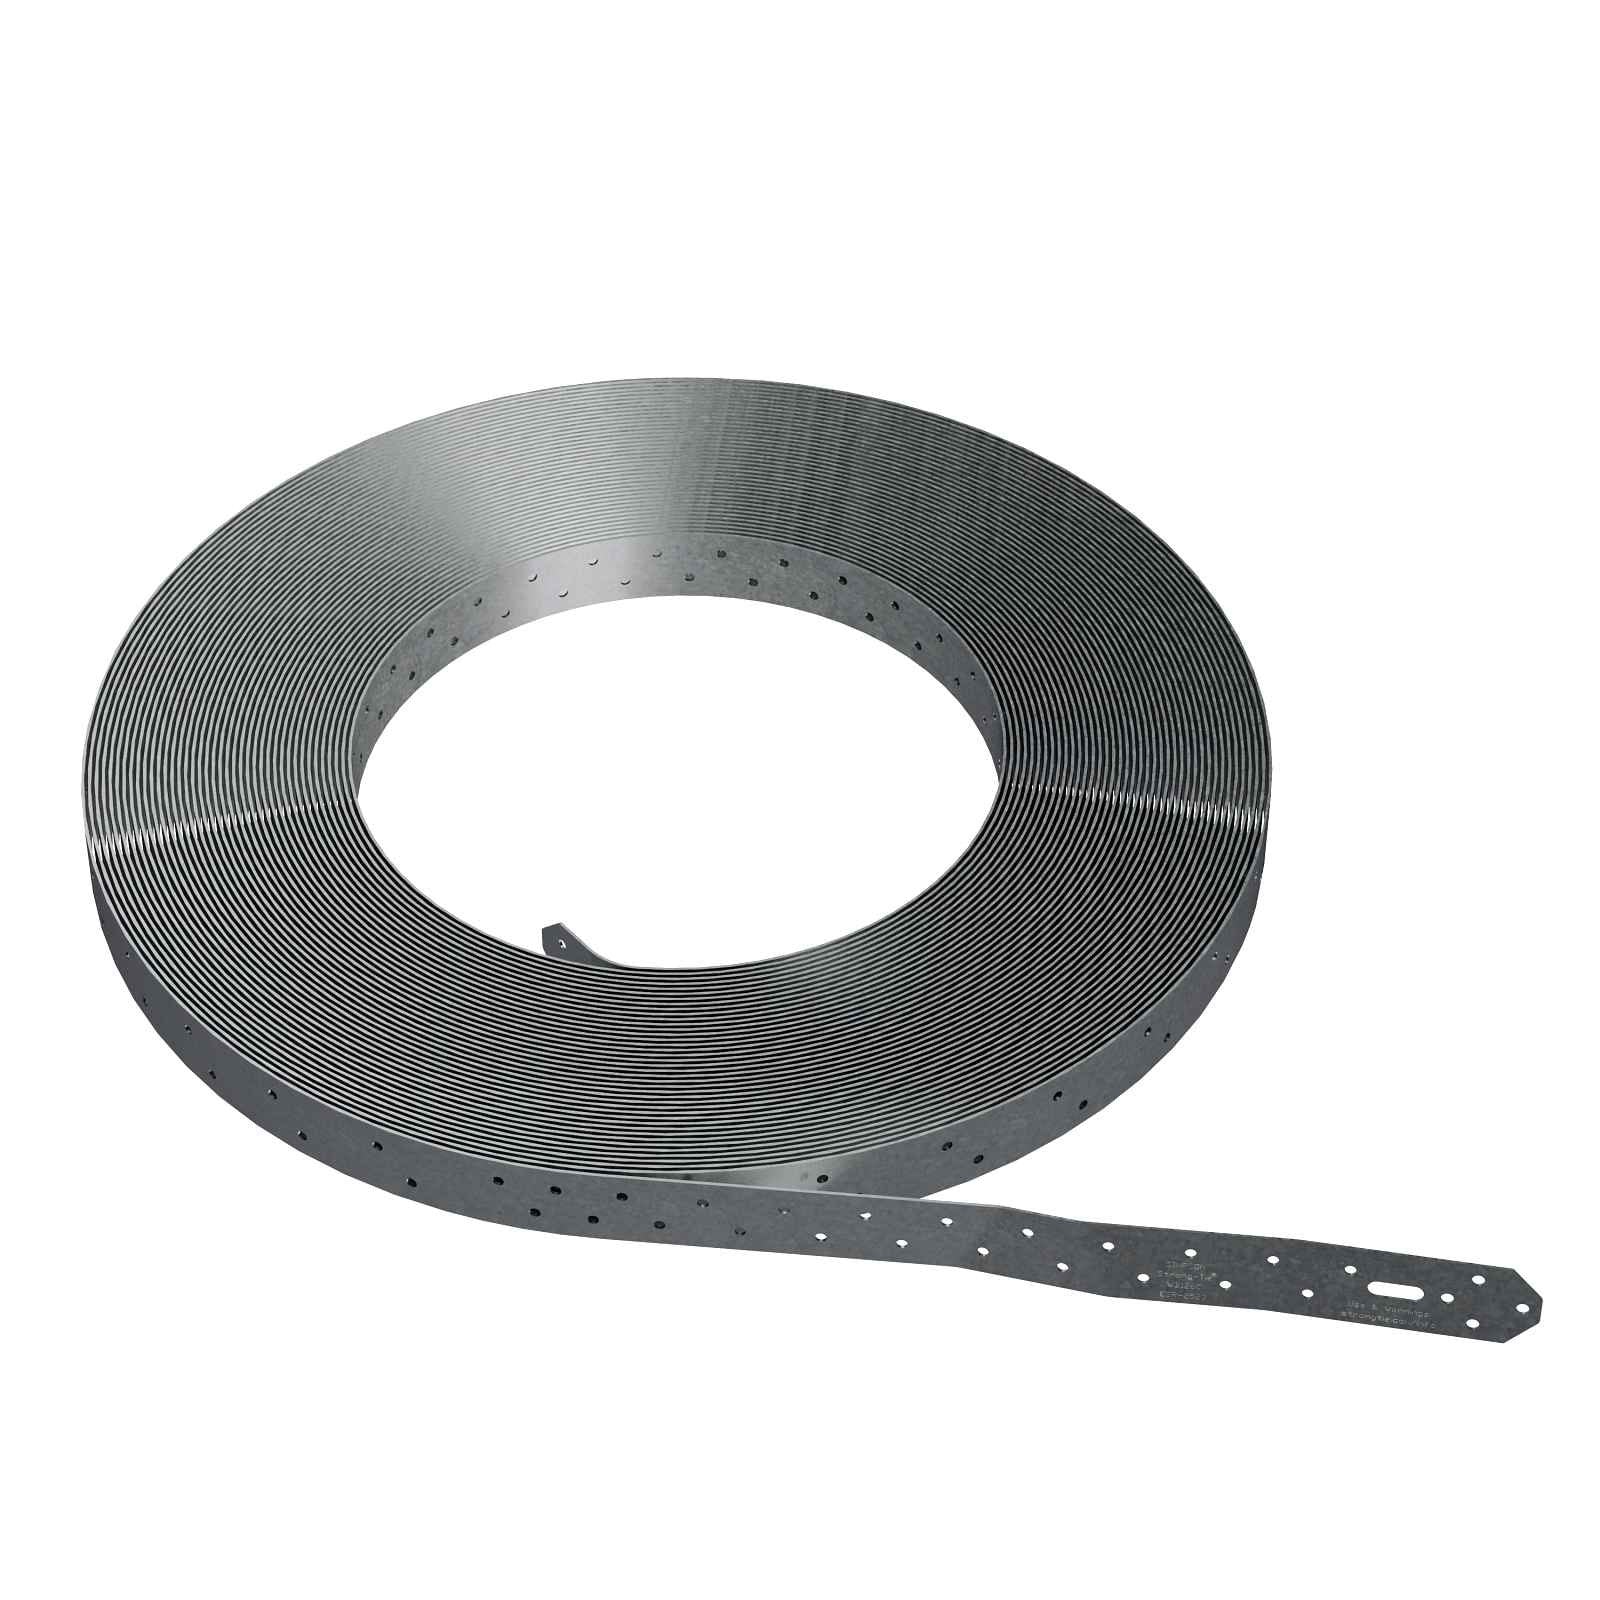 Simpson WB126C Coiled Wall Bracing - G90 Galvanized